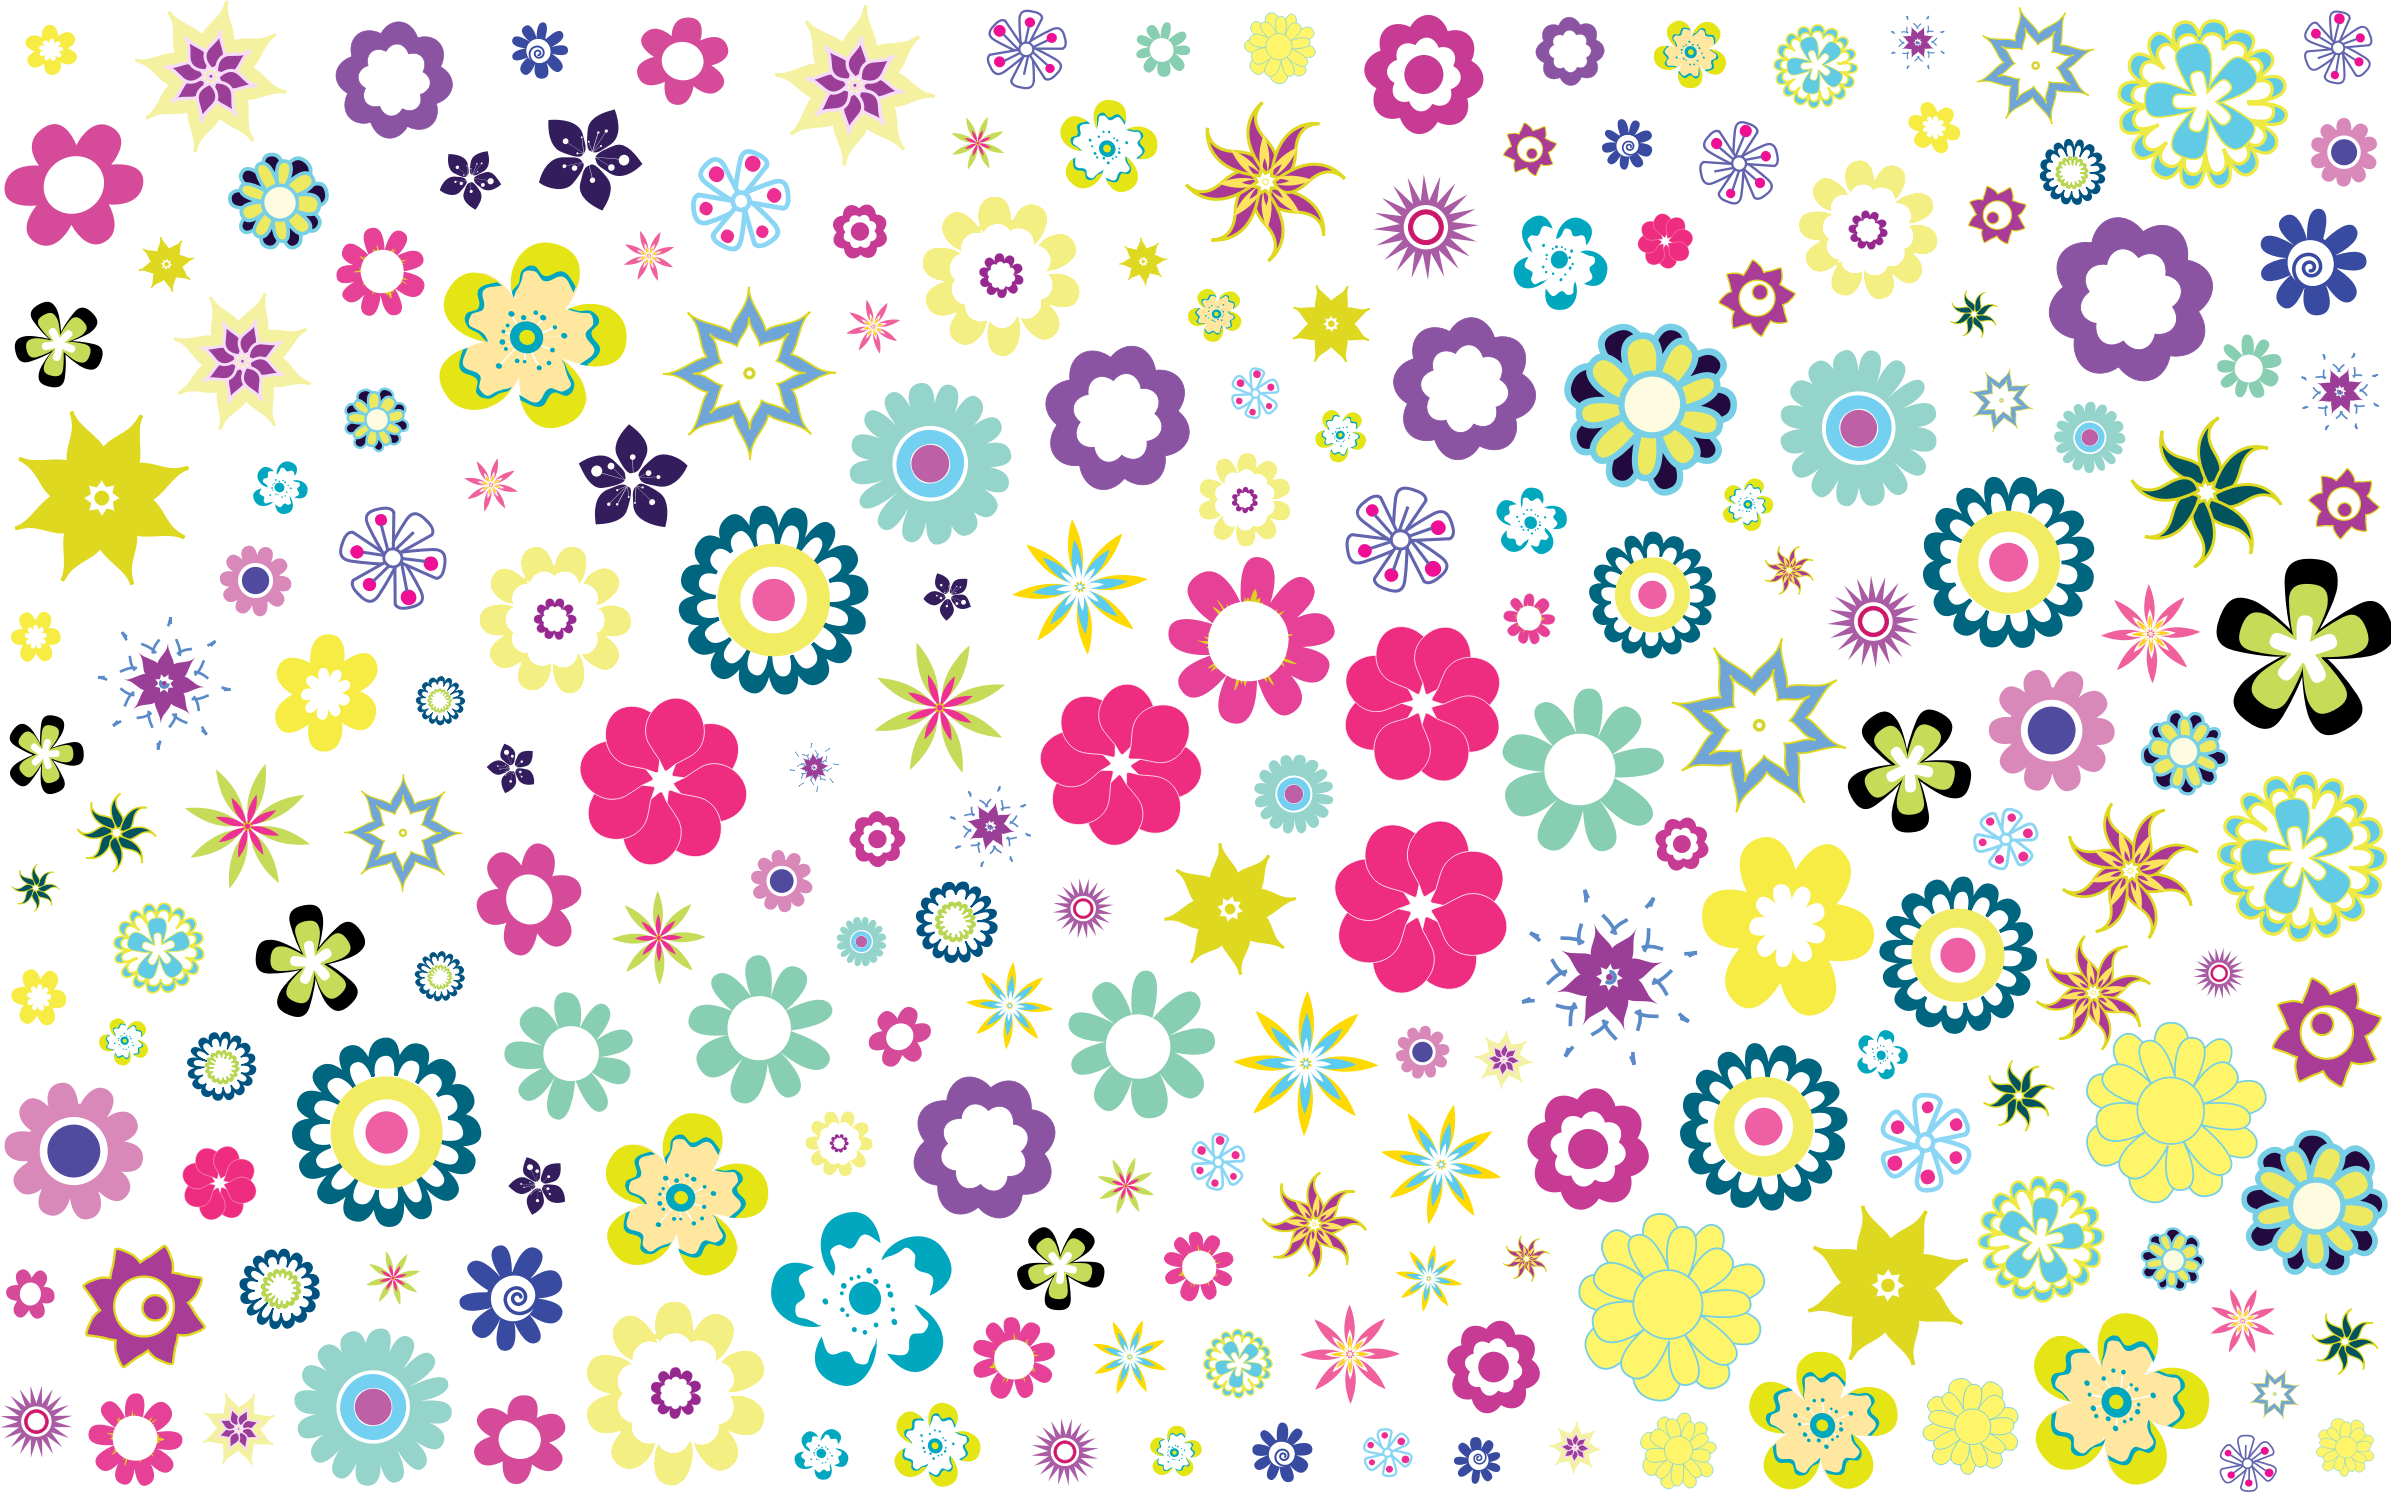 Clip Art Images Techflourish Collections Clipart - Colorful Floral Background Patterns - HD Wallpaper 